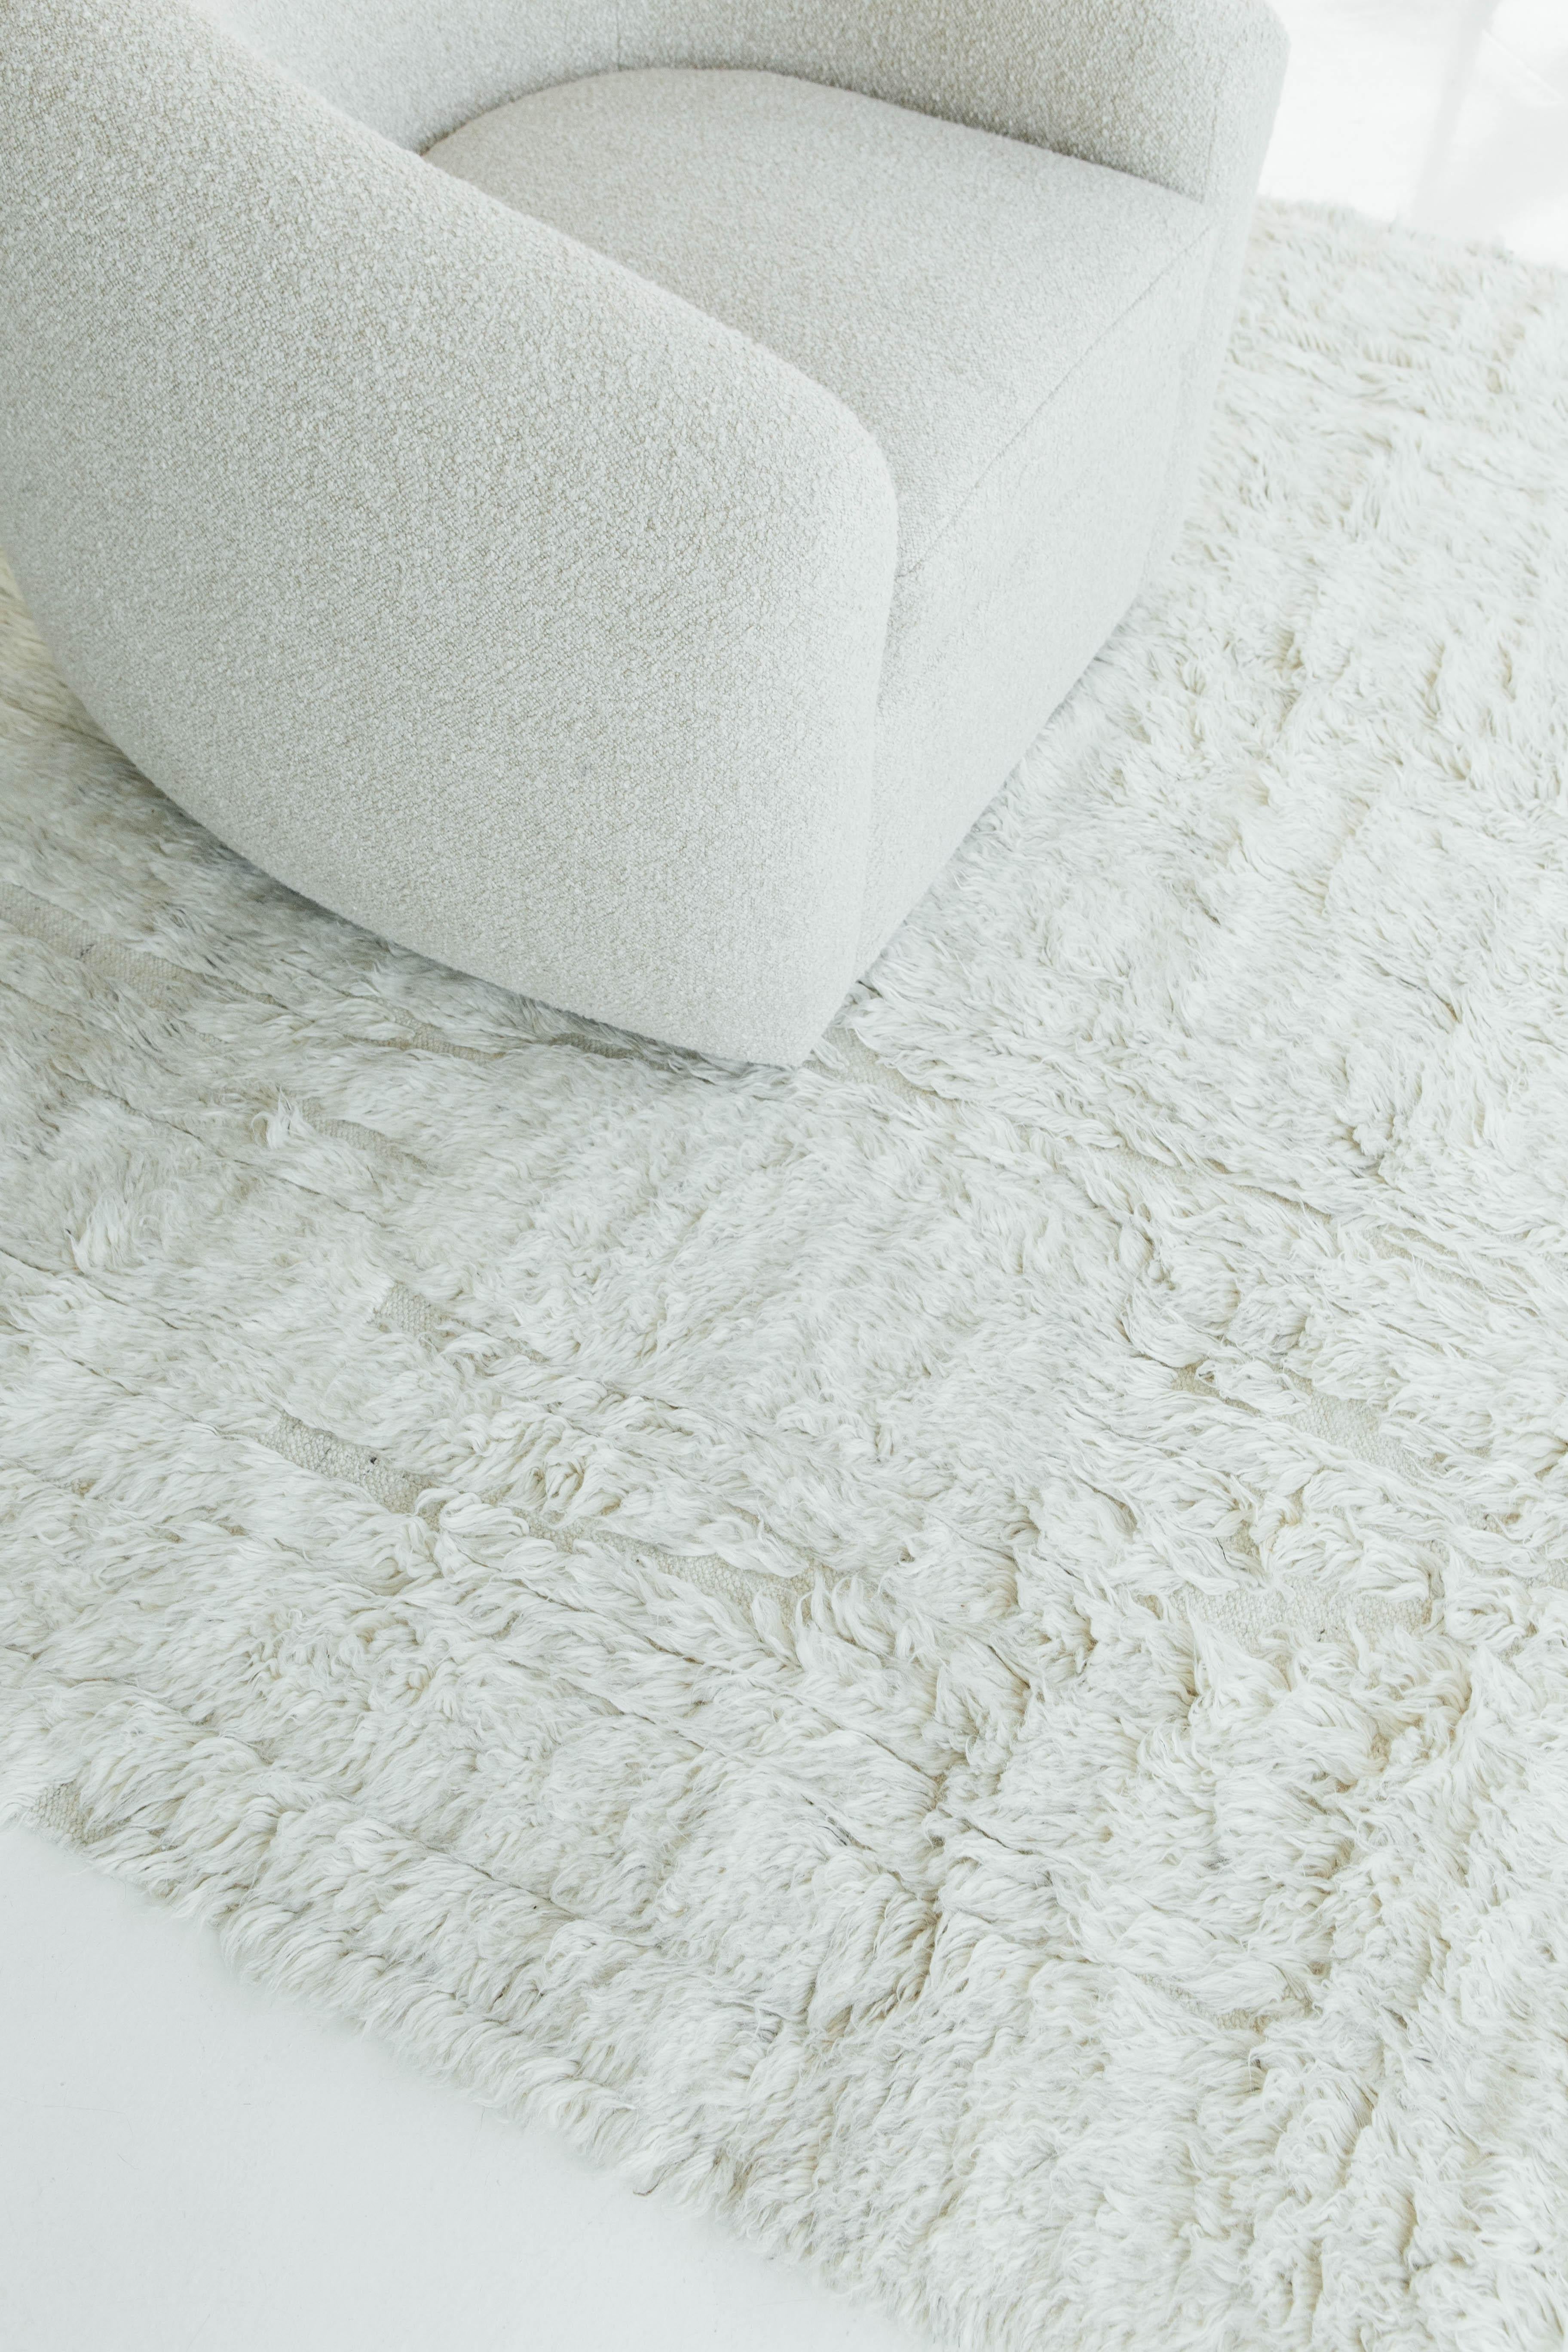 Wool Notes Rug, Design Rhymes Collection by Mehraban